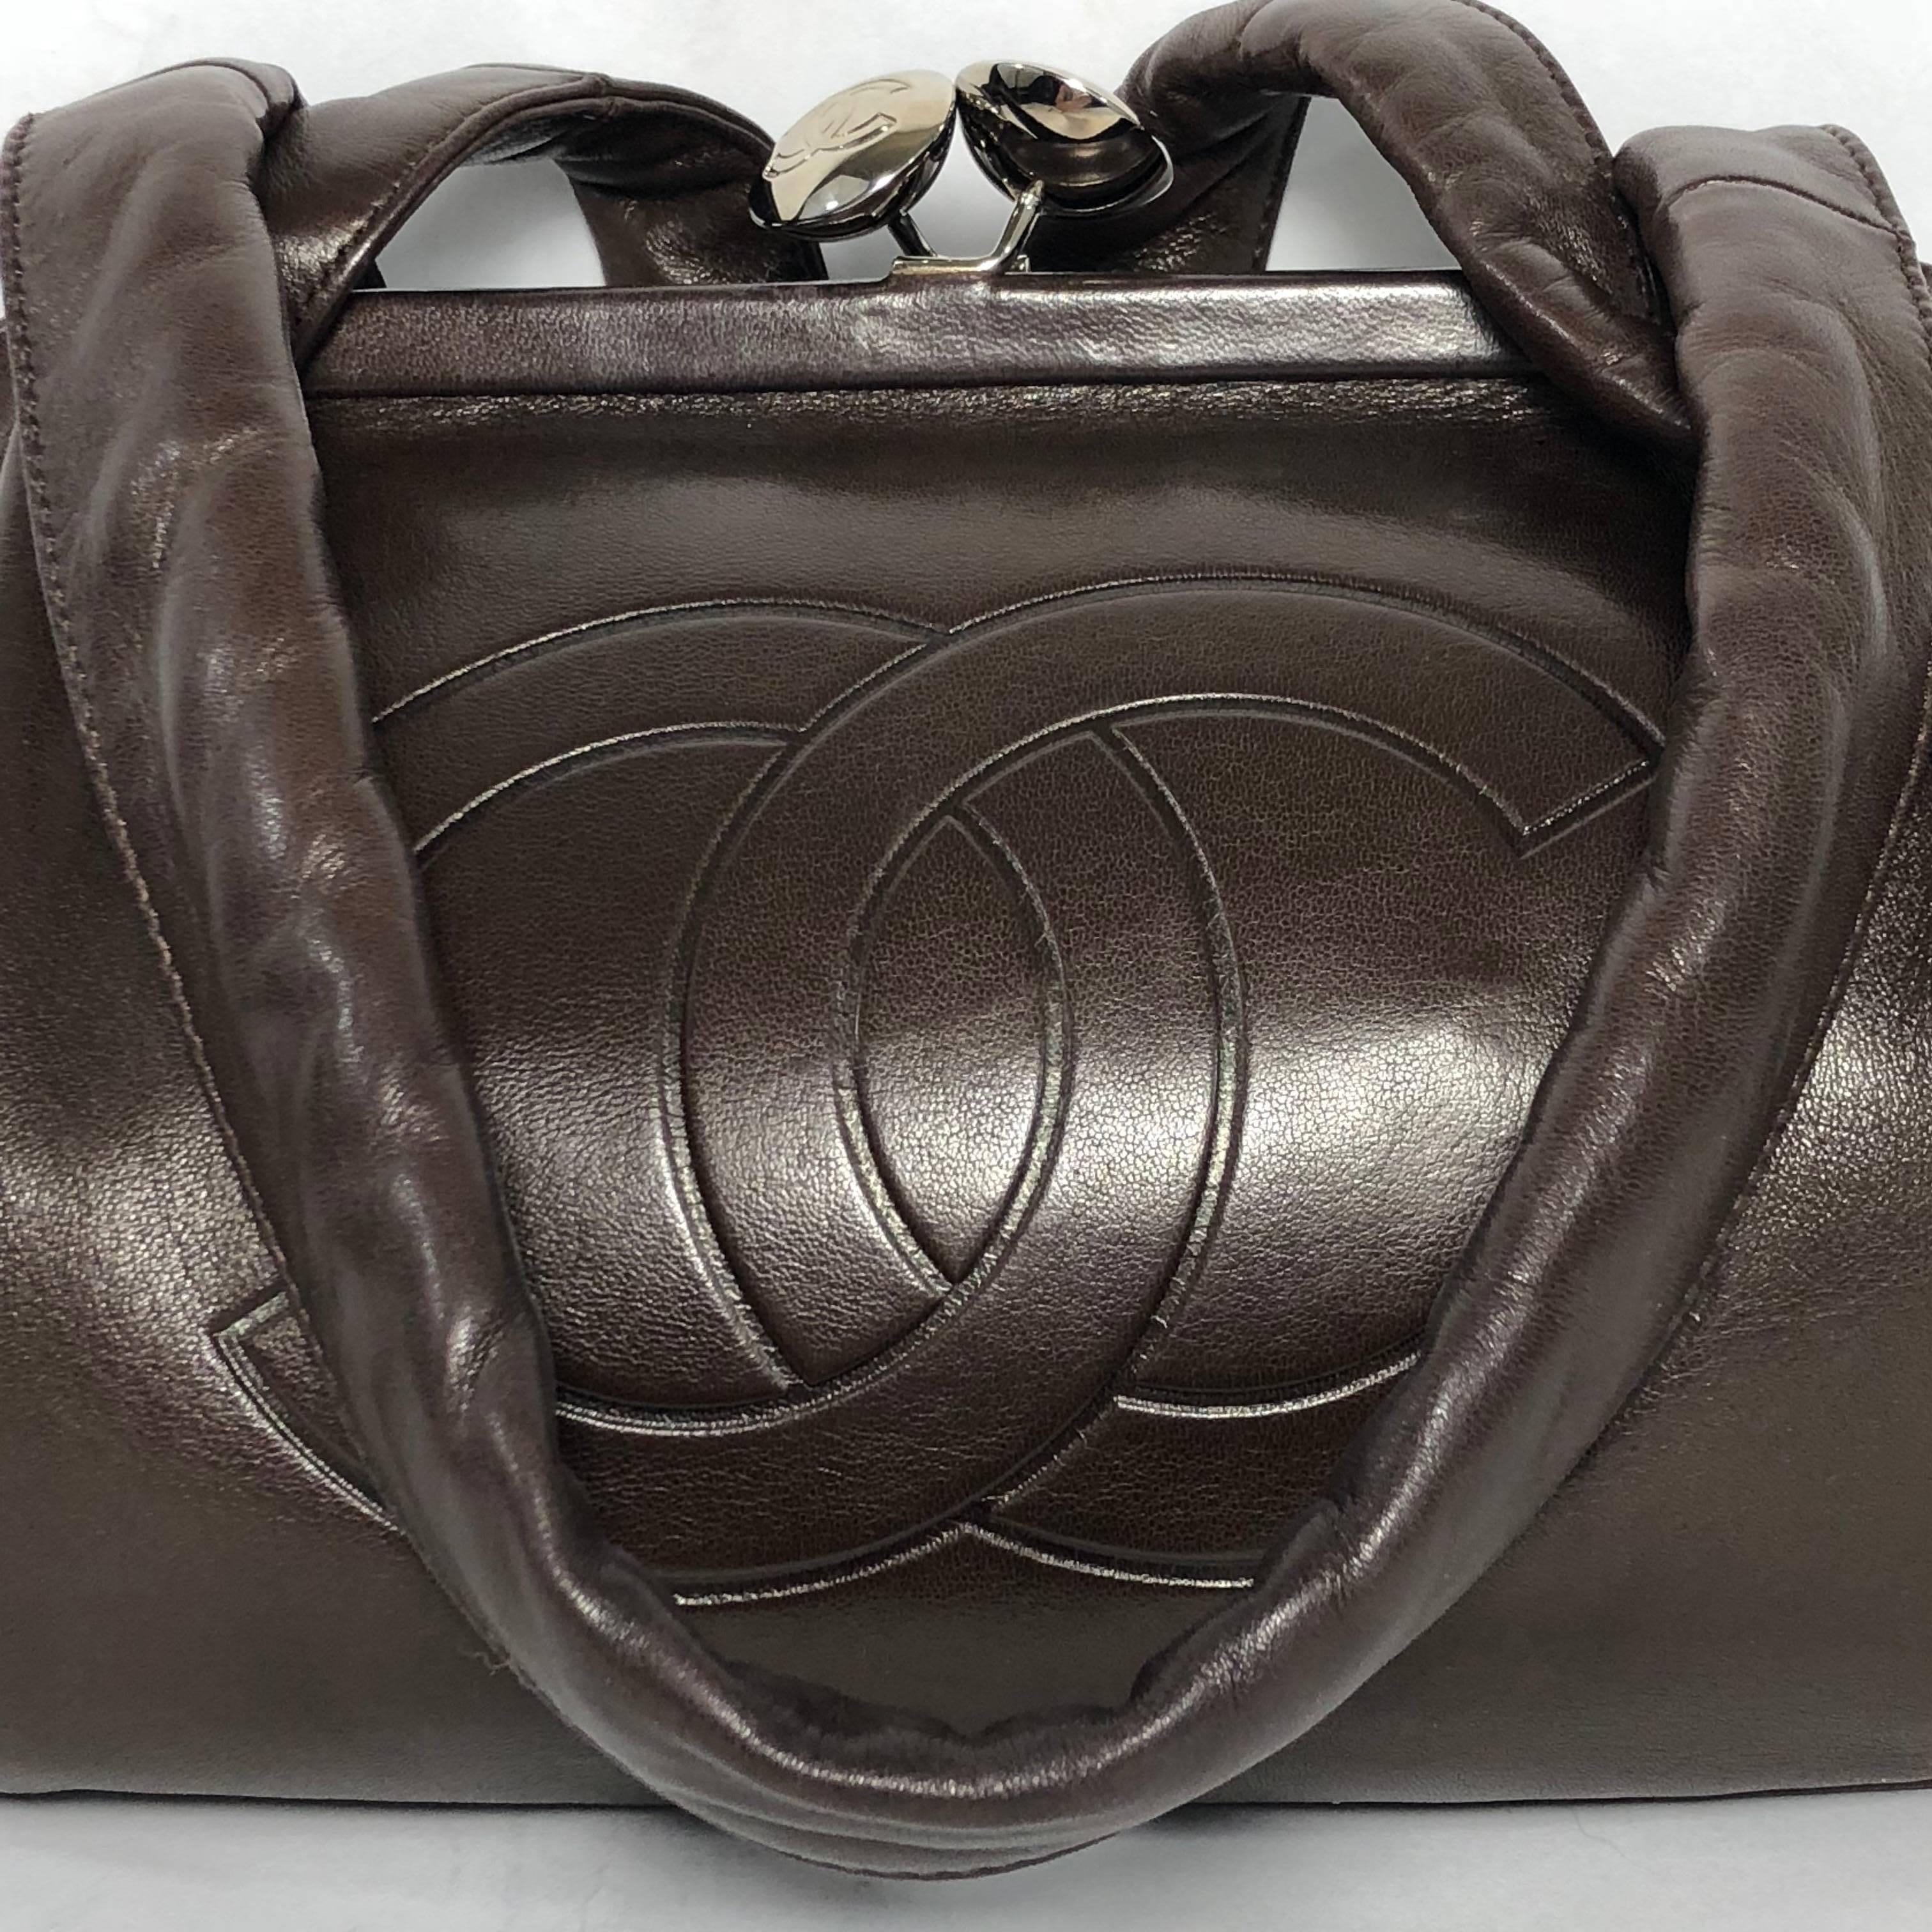 MODEL - Chanel Lambskin Bee Frame Shoulder Bag with Kissing Lock in Chocolate Brown

CONDITION - New! No signs of wear.

SKU - 2165

ORIGINAL RETAIL PRICE - 1995 + tax

DATE/SERIAL CODE - 9249133

ORIGIN - France

PRODUCTION - 2004 to